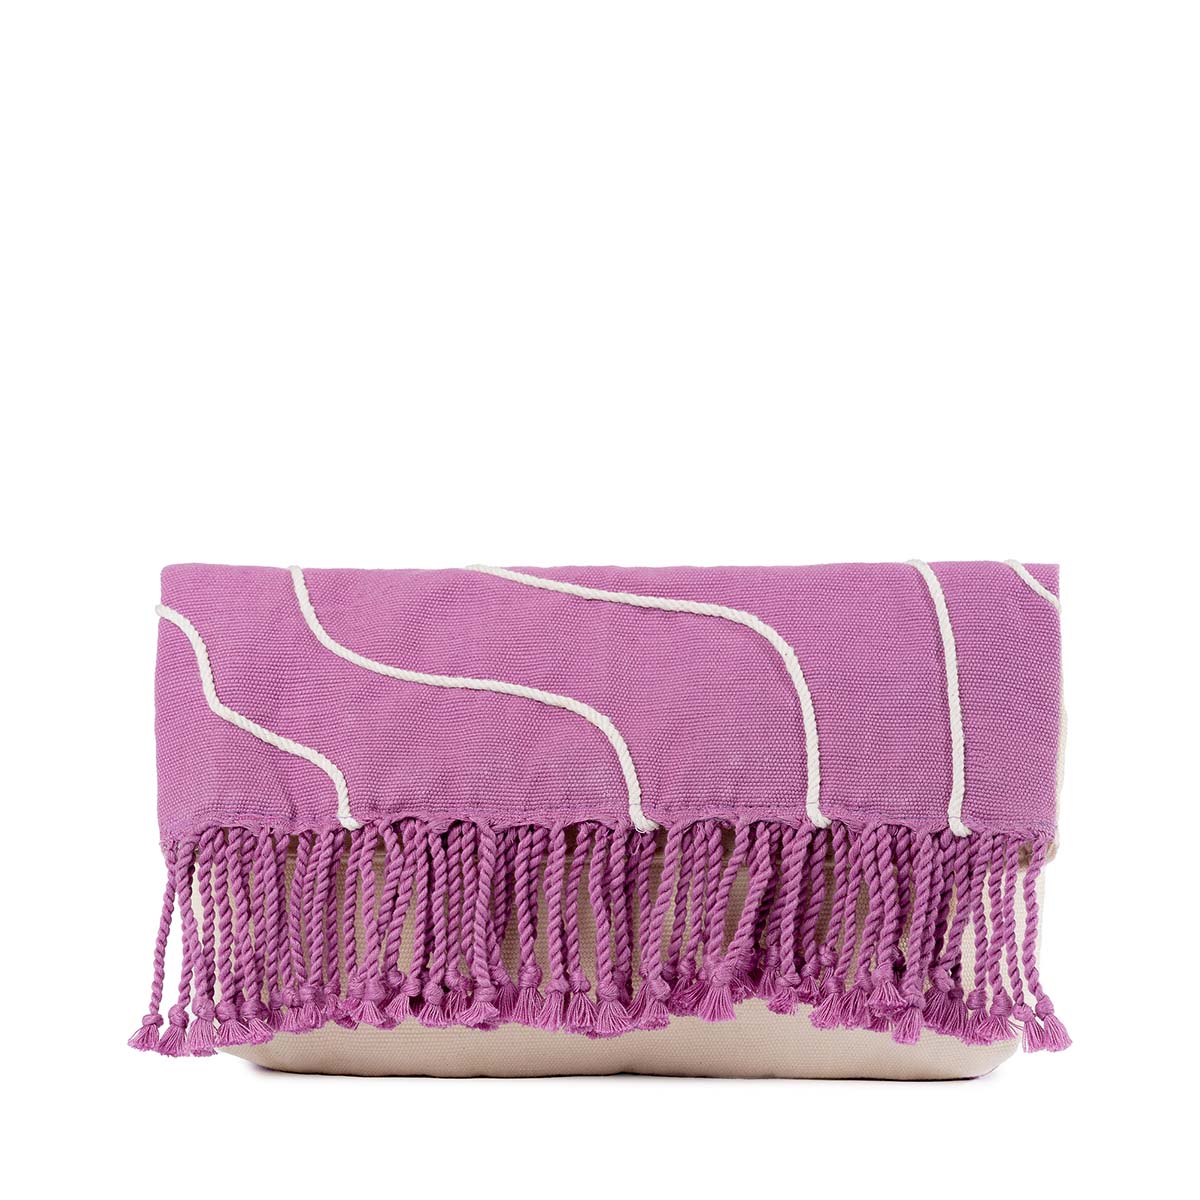 The front of the hand woven artisan Margarita Clutch in Cosmic Waves. It has a magenta solid background with thin wavy white stripes. The top has magenta fringe.